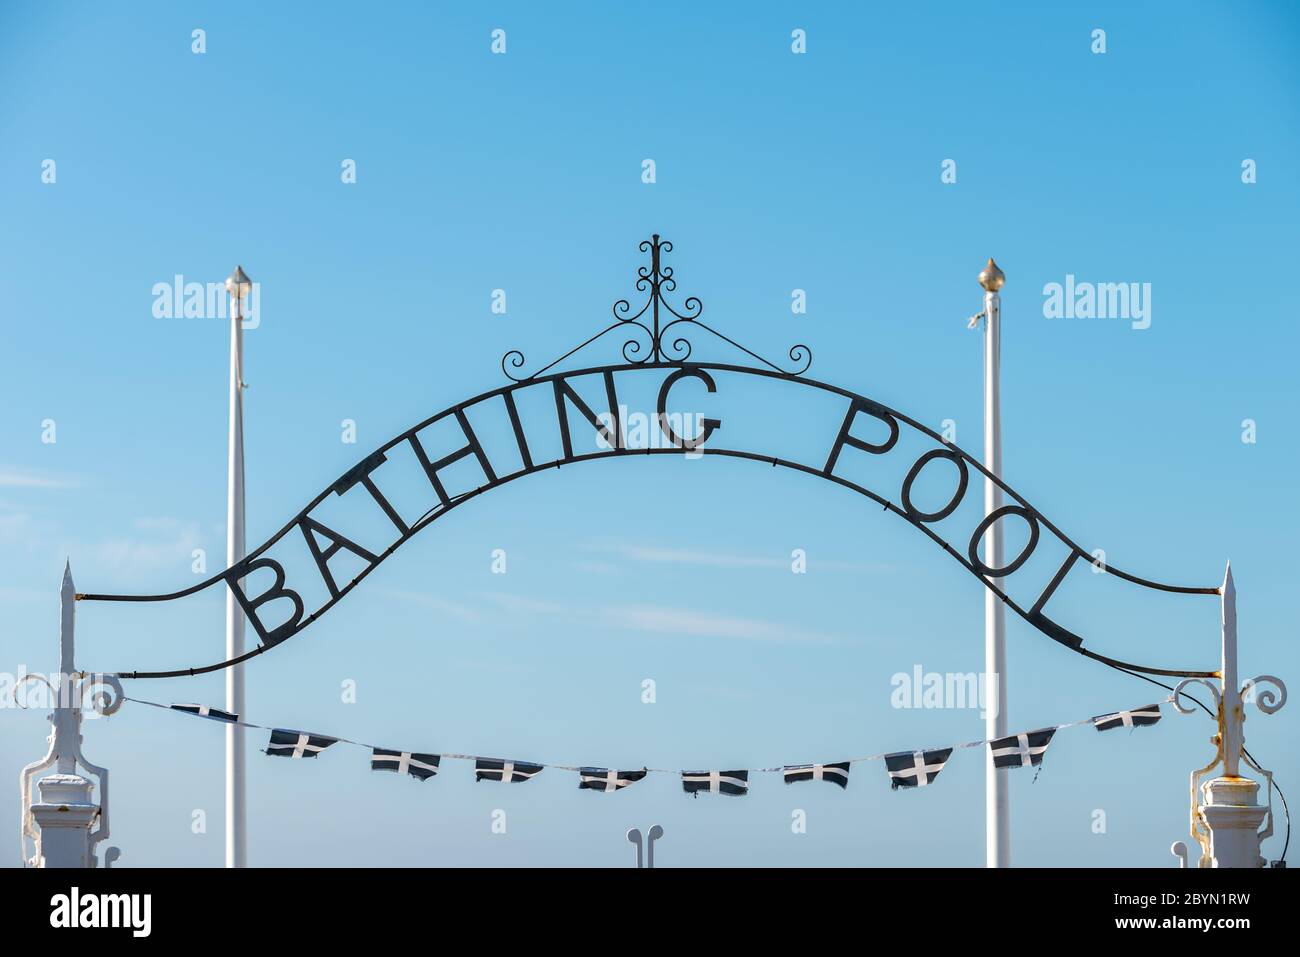 A Bathing Pool sign at the Jubilee Bathing Pool Lido in Penzance, Cornwall, UK. Stock Photo